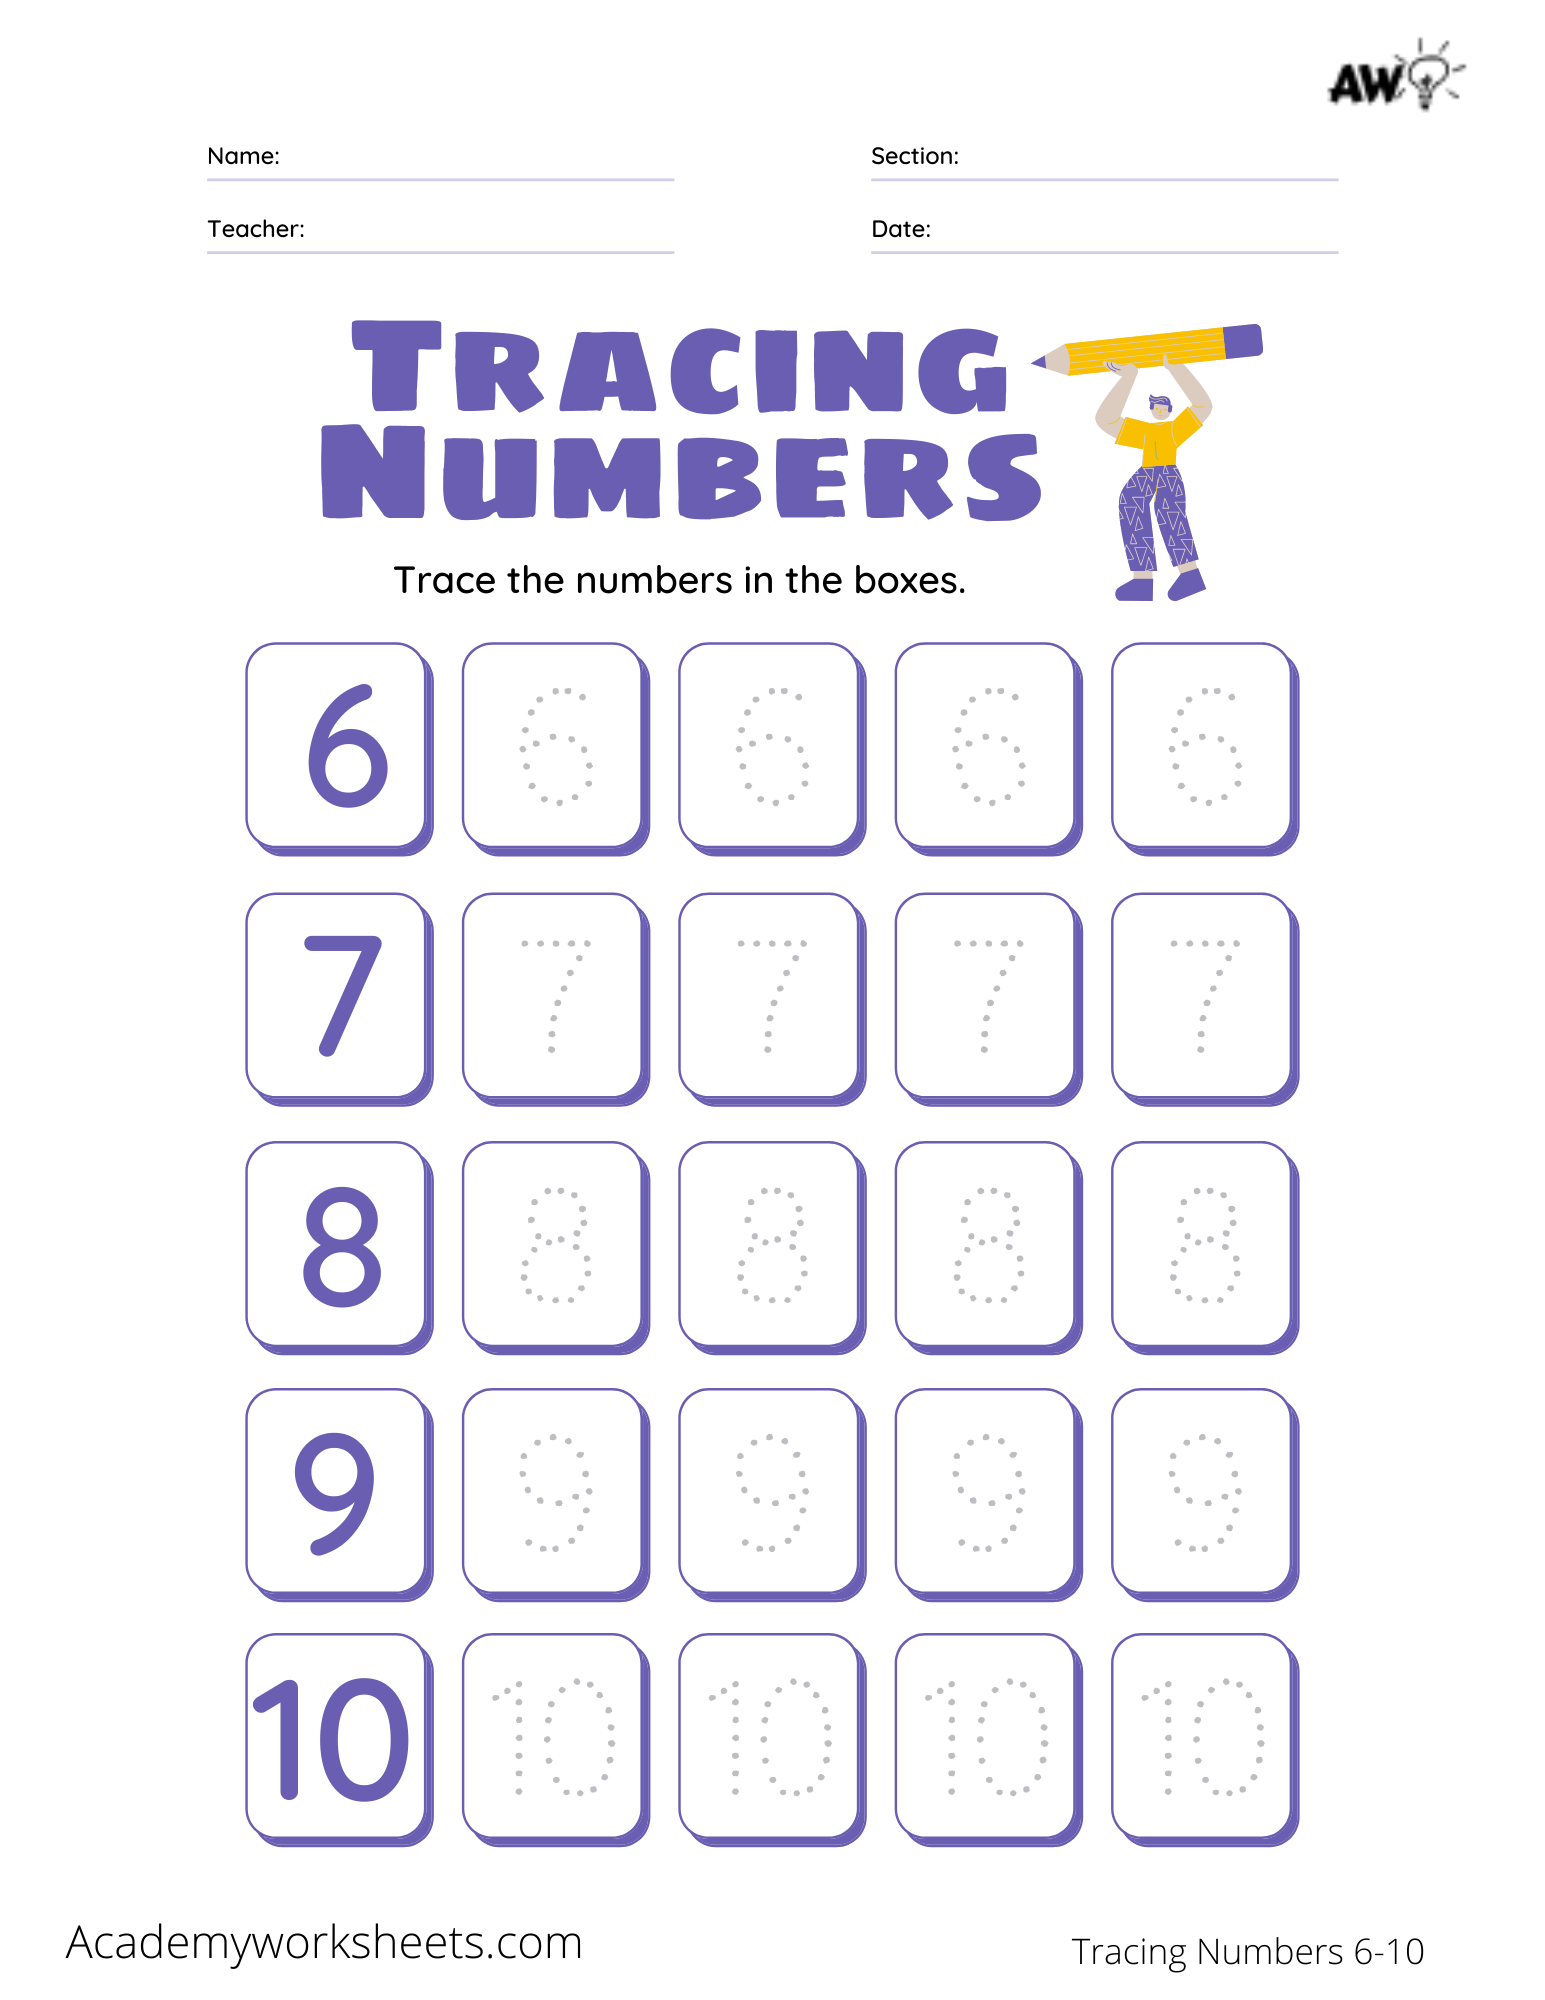 tracing-numbers-6-10-academy-worksheets